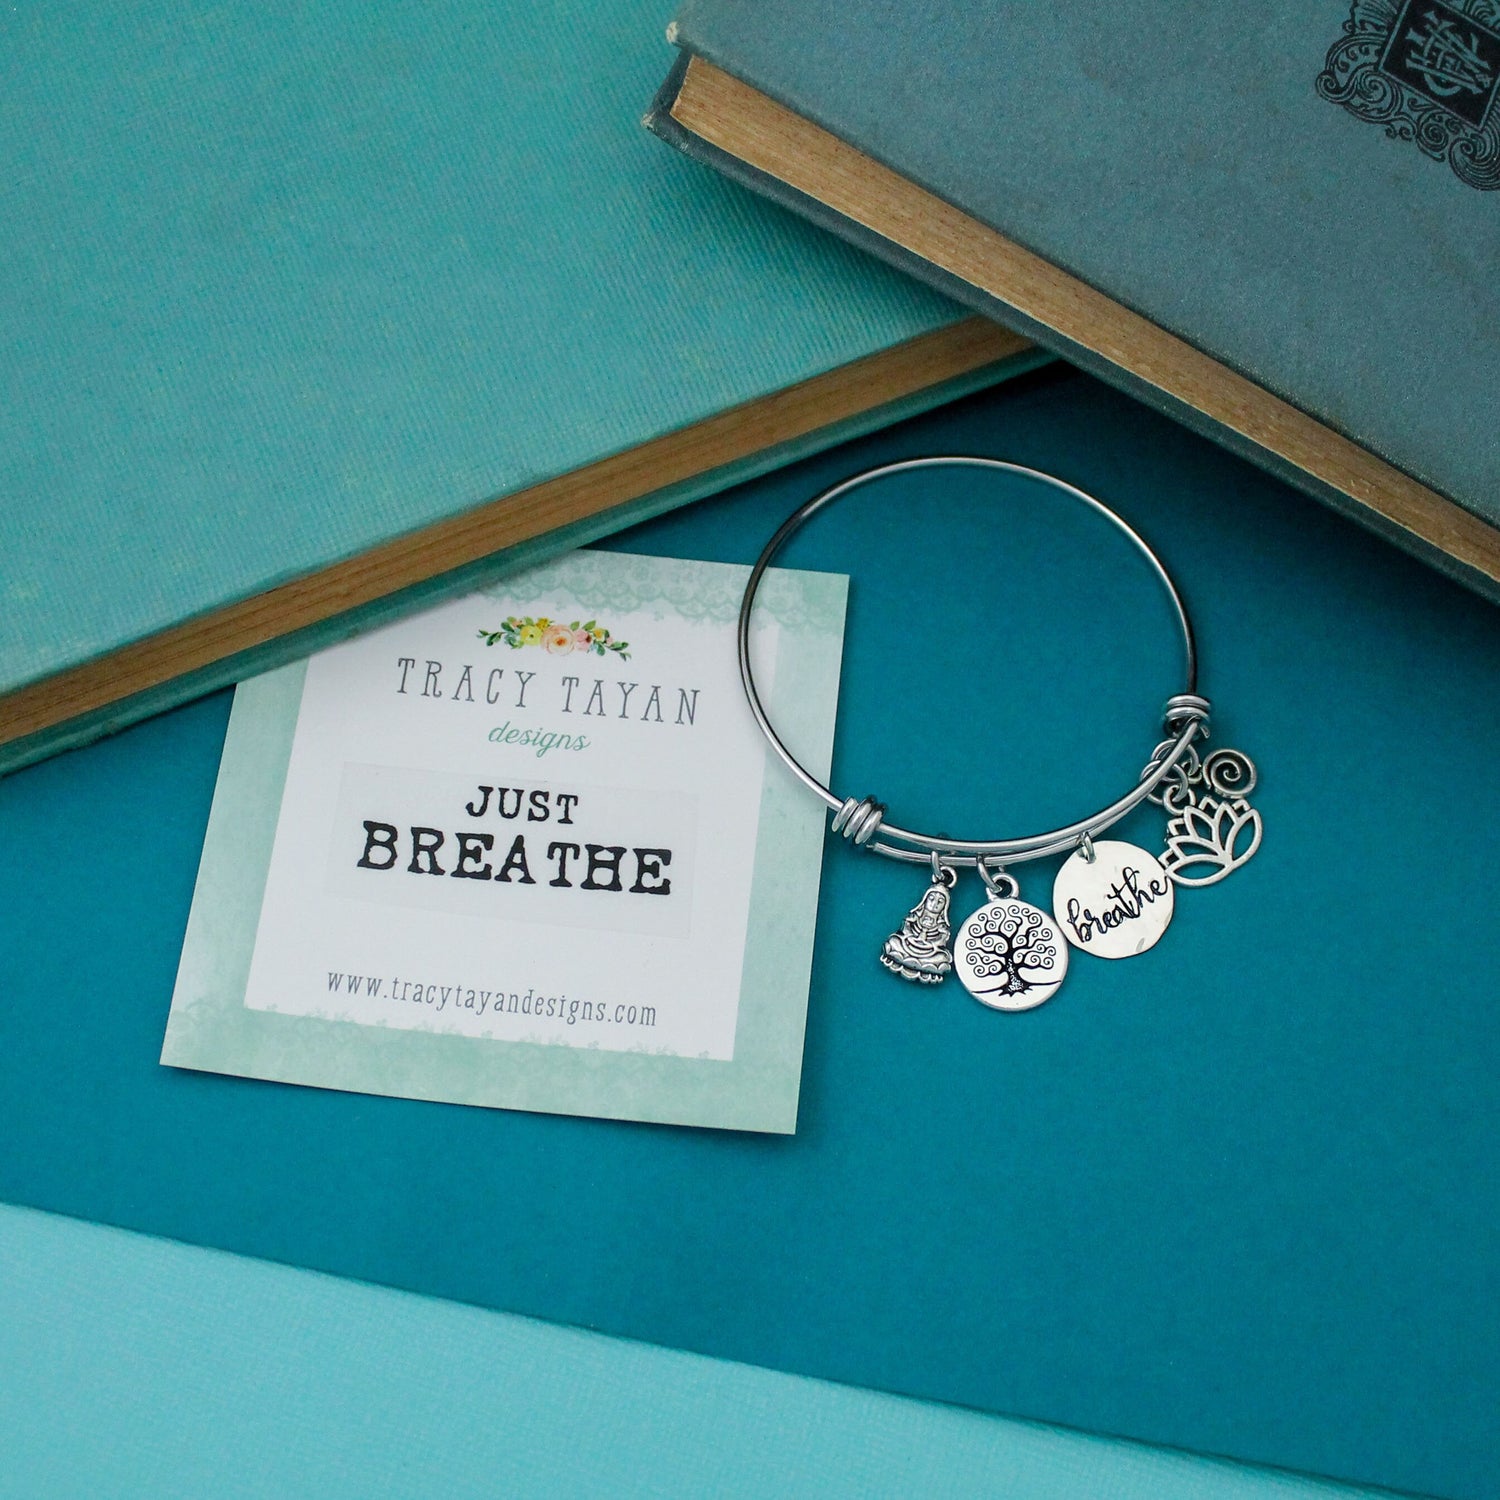 Breathe Bracelet, Just Breathe Bangle, Positive Jewelry Bracelet, Yoga Bracelet Gift, Hand Stamped Personalized Jewelry Gift, Gift for Her